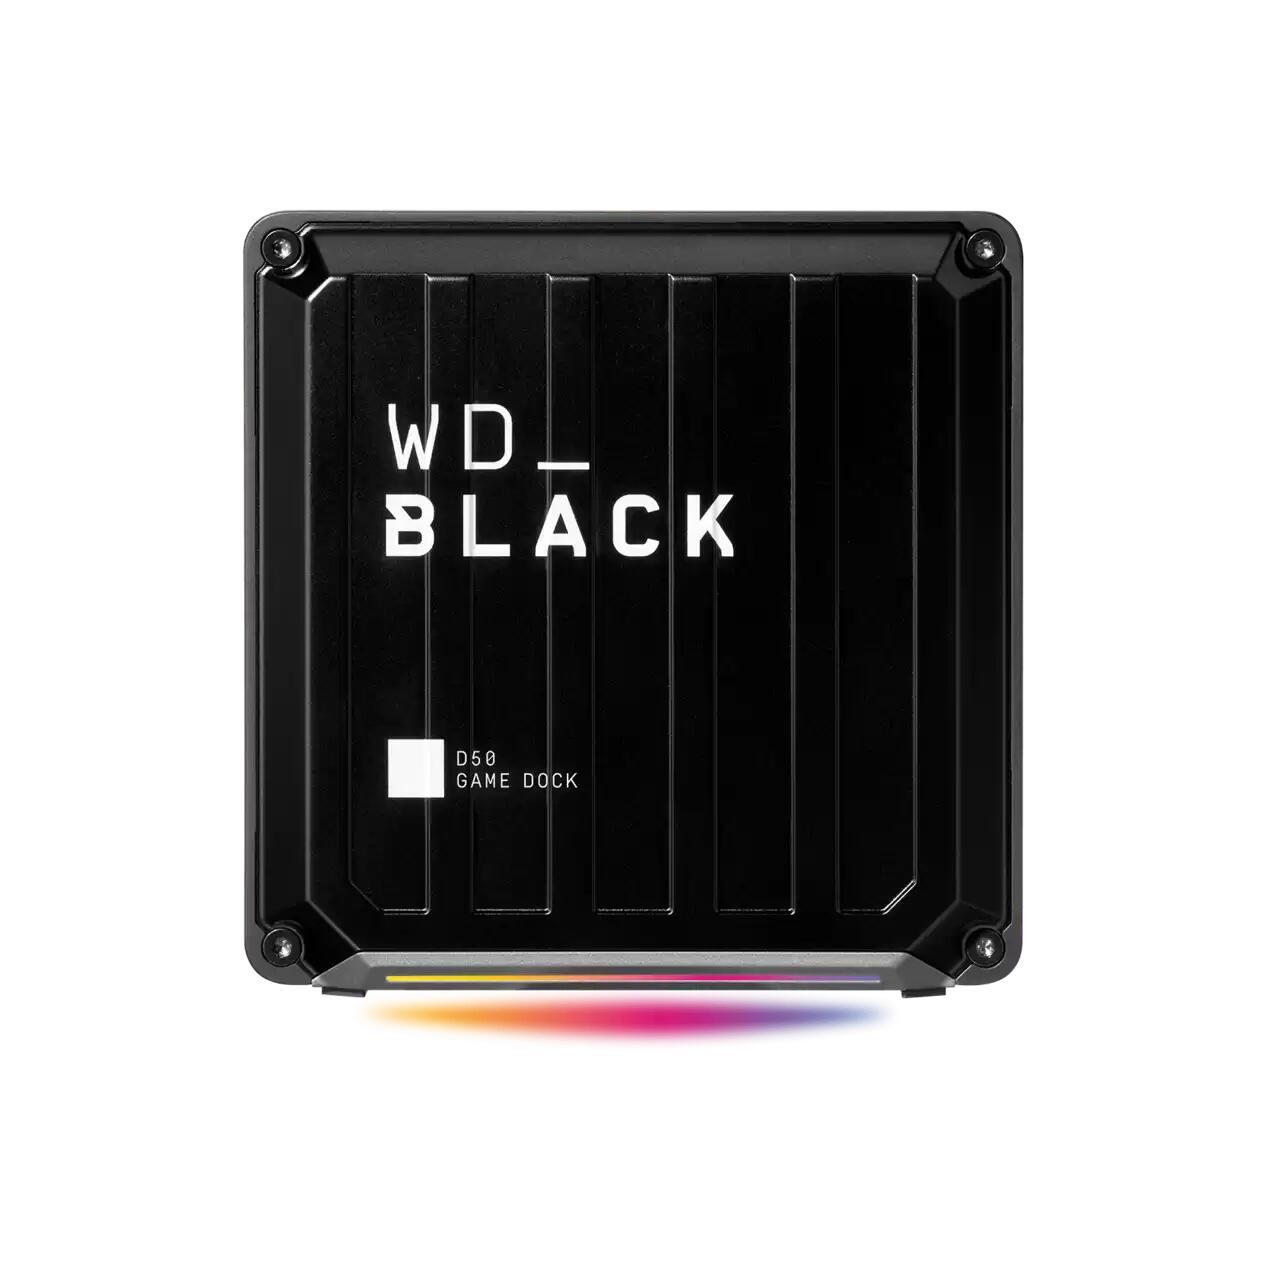 Western Digital D50 Cablato Thunderbolt 3 Nero (WD_BLACK D50 GAME DOCK SSD 1TB B - Picture 1 of 1